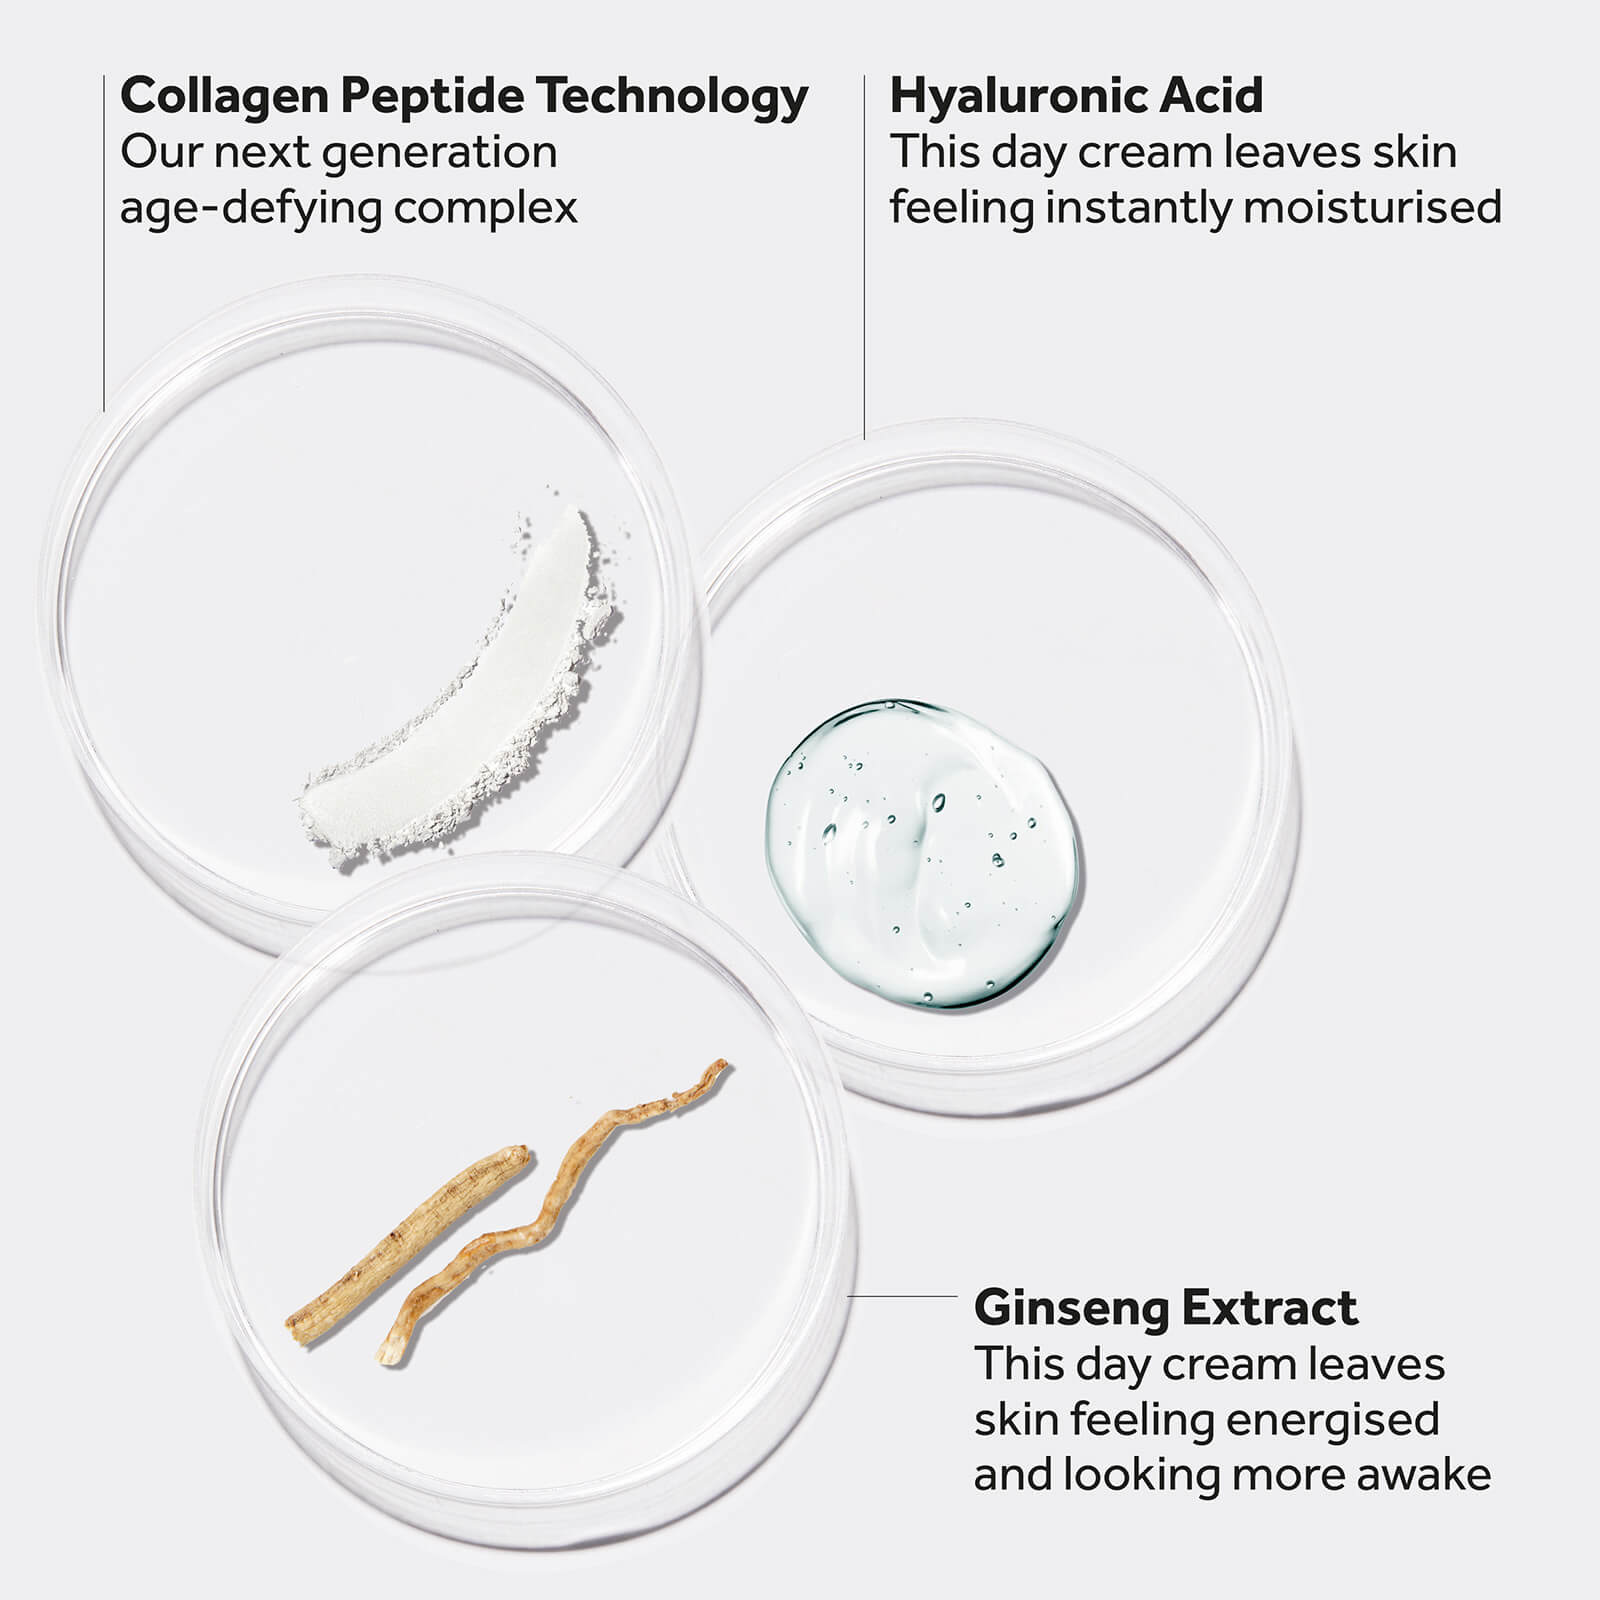 Collagen Peptide Technology - Our next generation age-defying complex. Hyaluronic Acid - This day cream leaves skin feeling instantly moisturised. Ginseng Extract - This day cream leaves skin feeling energised and looking more awake.